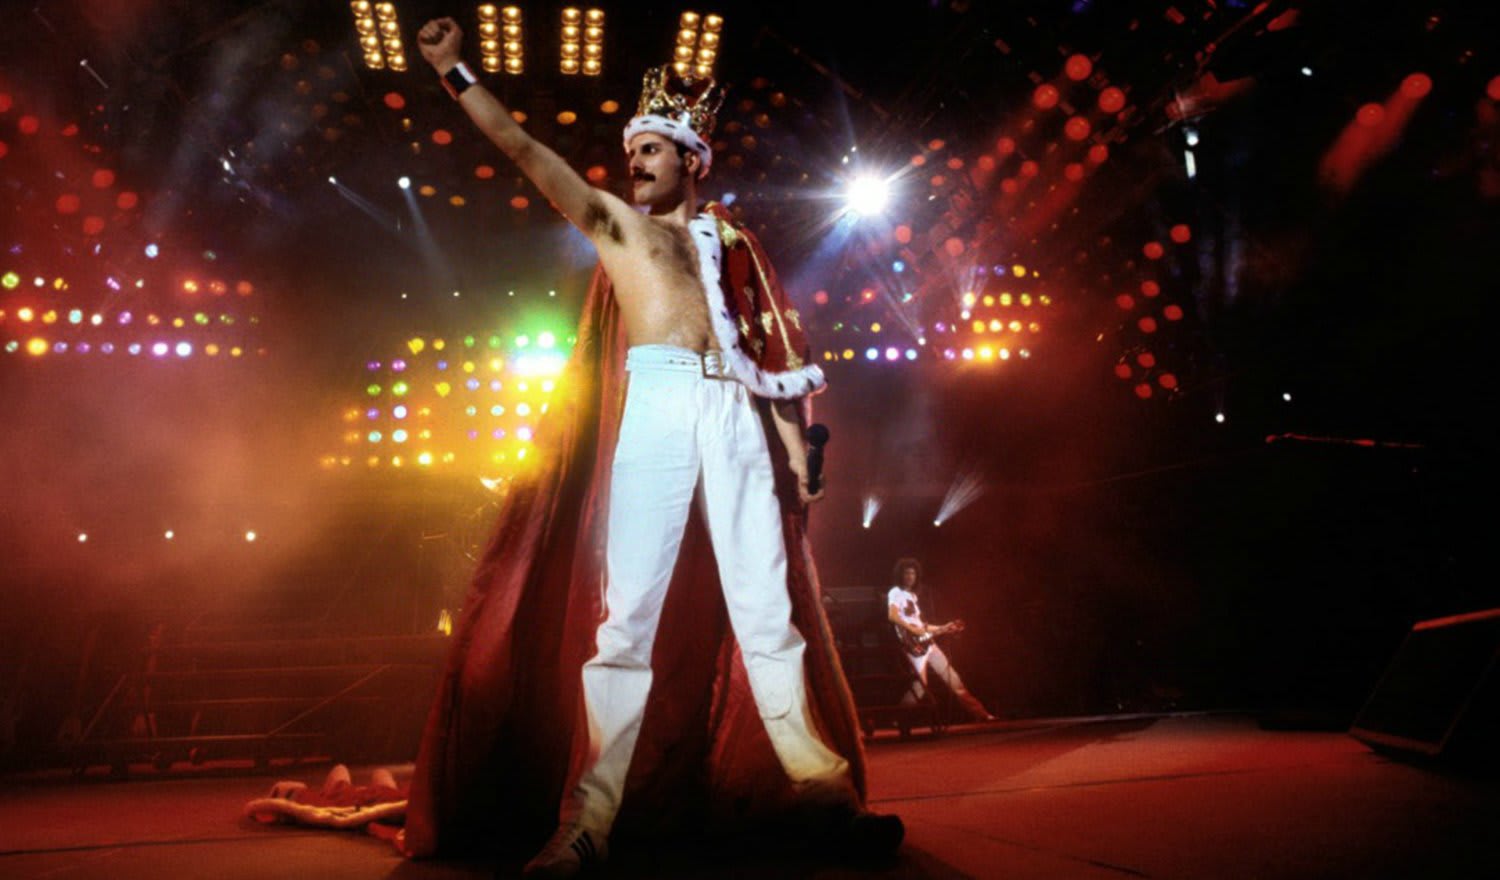 Freddie Mercury of Queen at Wembley Stadium in 1986, one of Denis O'Regan’s photos which will be displayed in his new gallery in Hammersmith